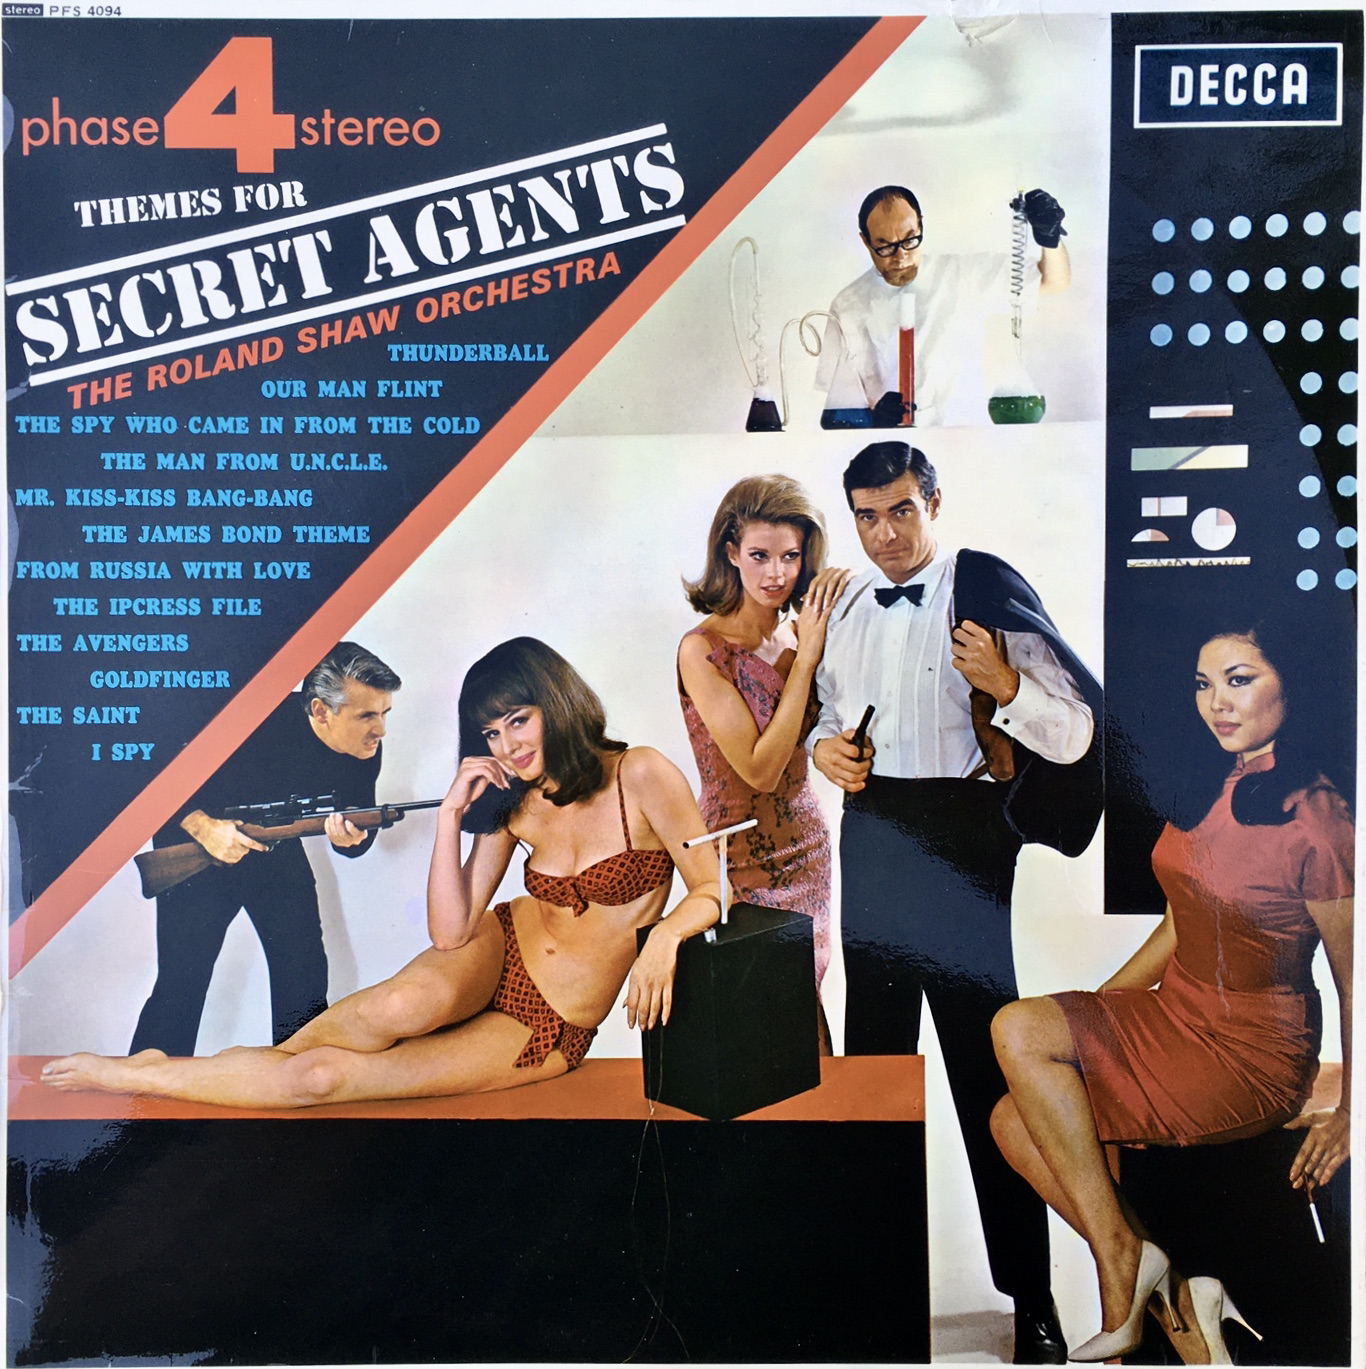 Themes for Secret Agents Roland Shaw front cover